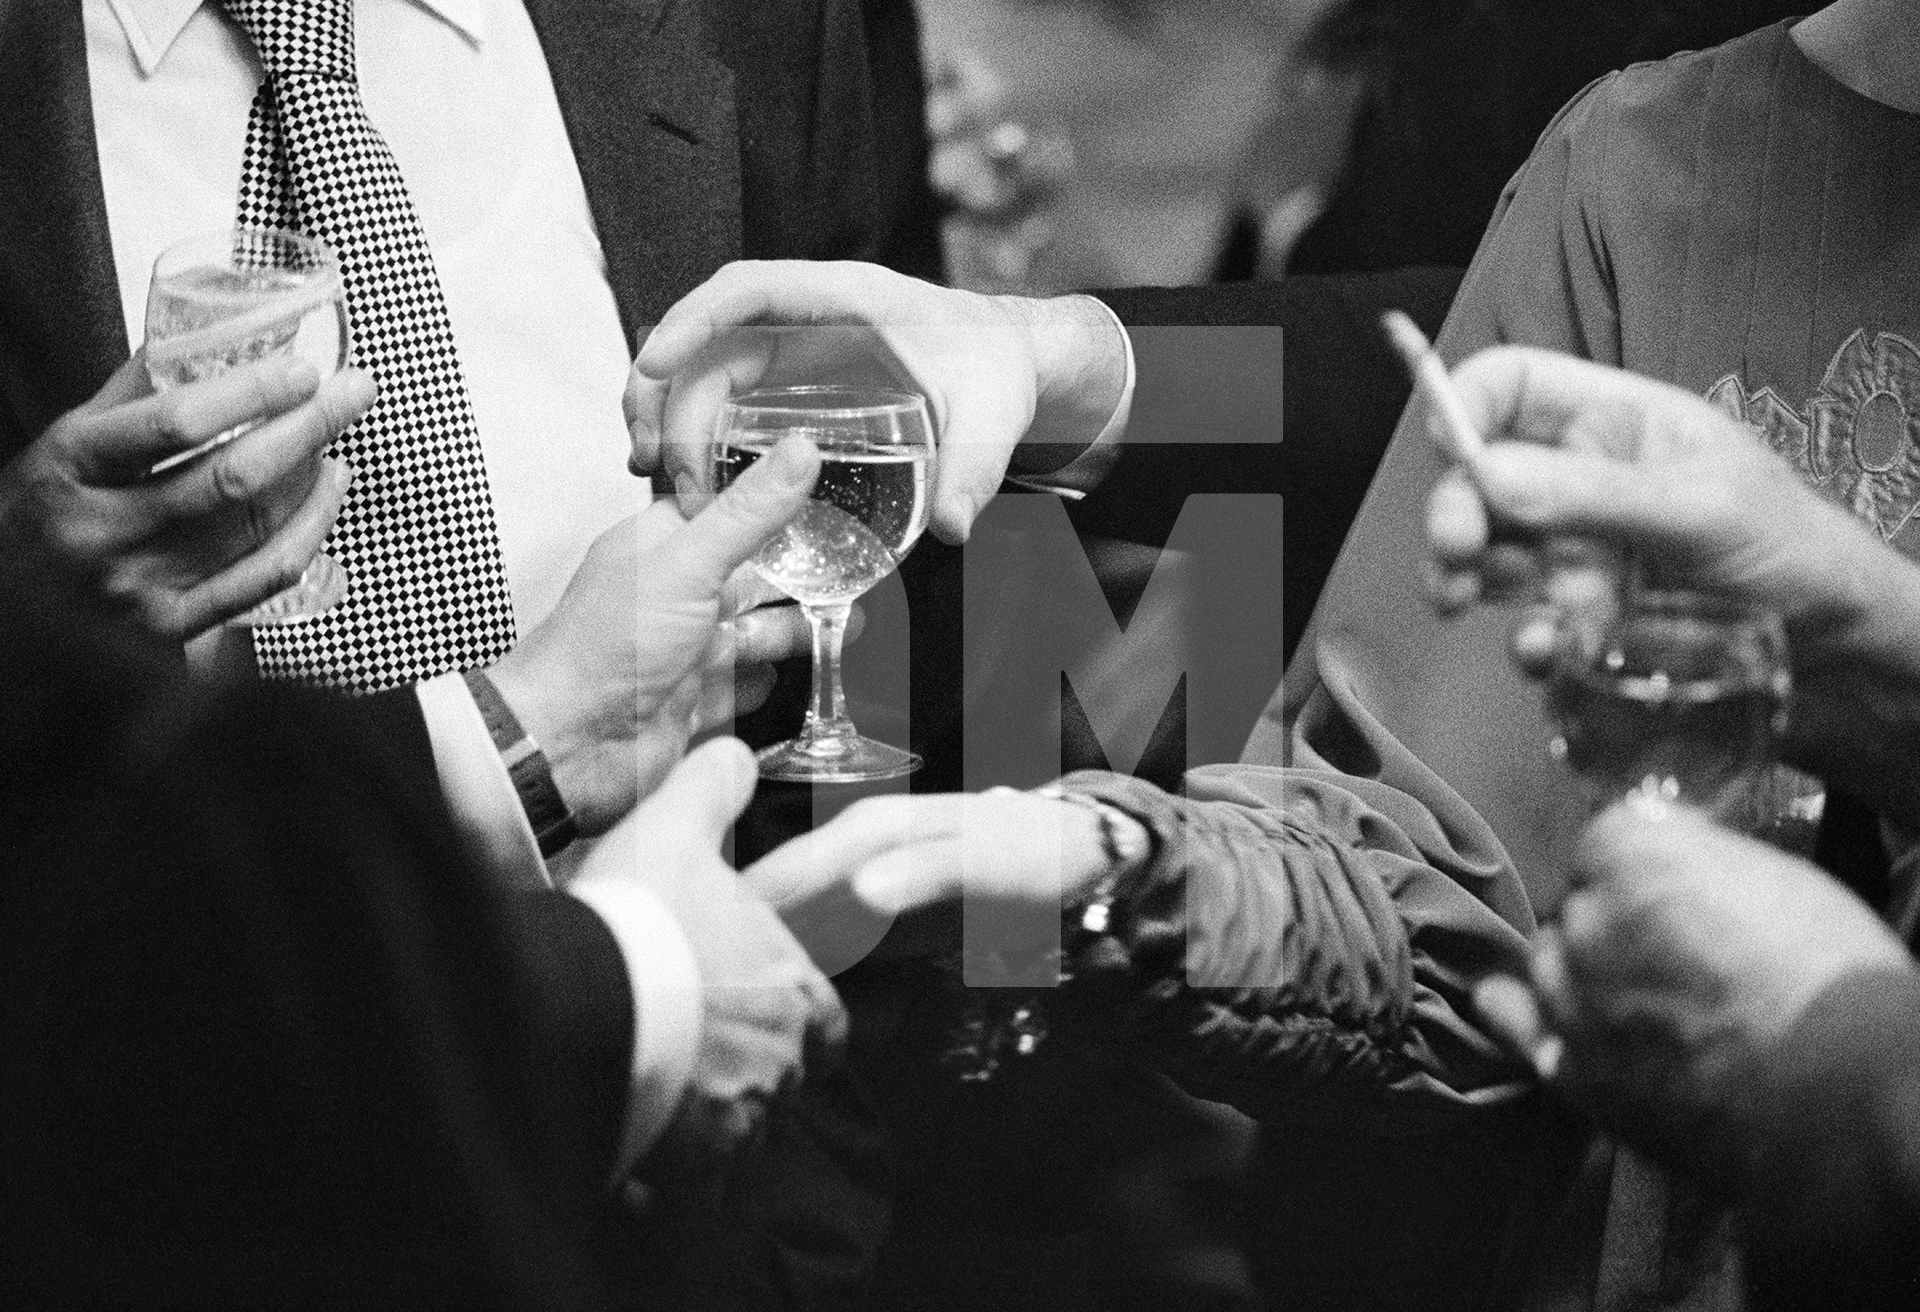 Reception for the new mayor, Civic Centre, Bromley. April 1985 by Daniel Meadows